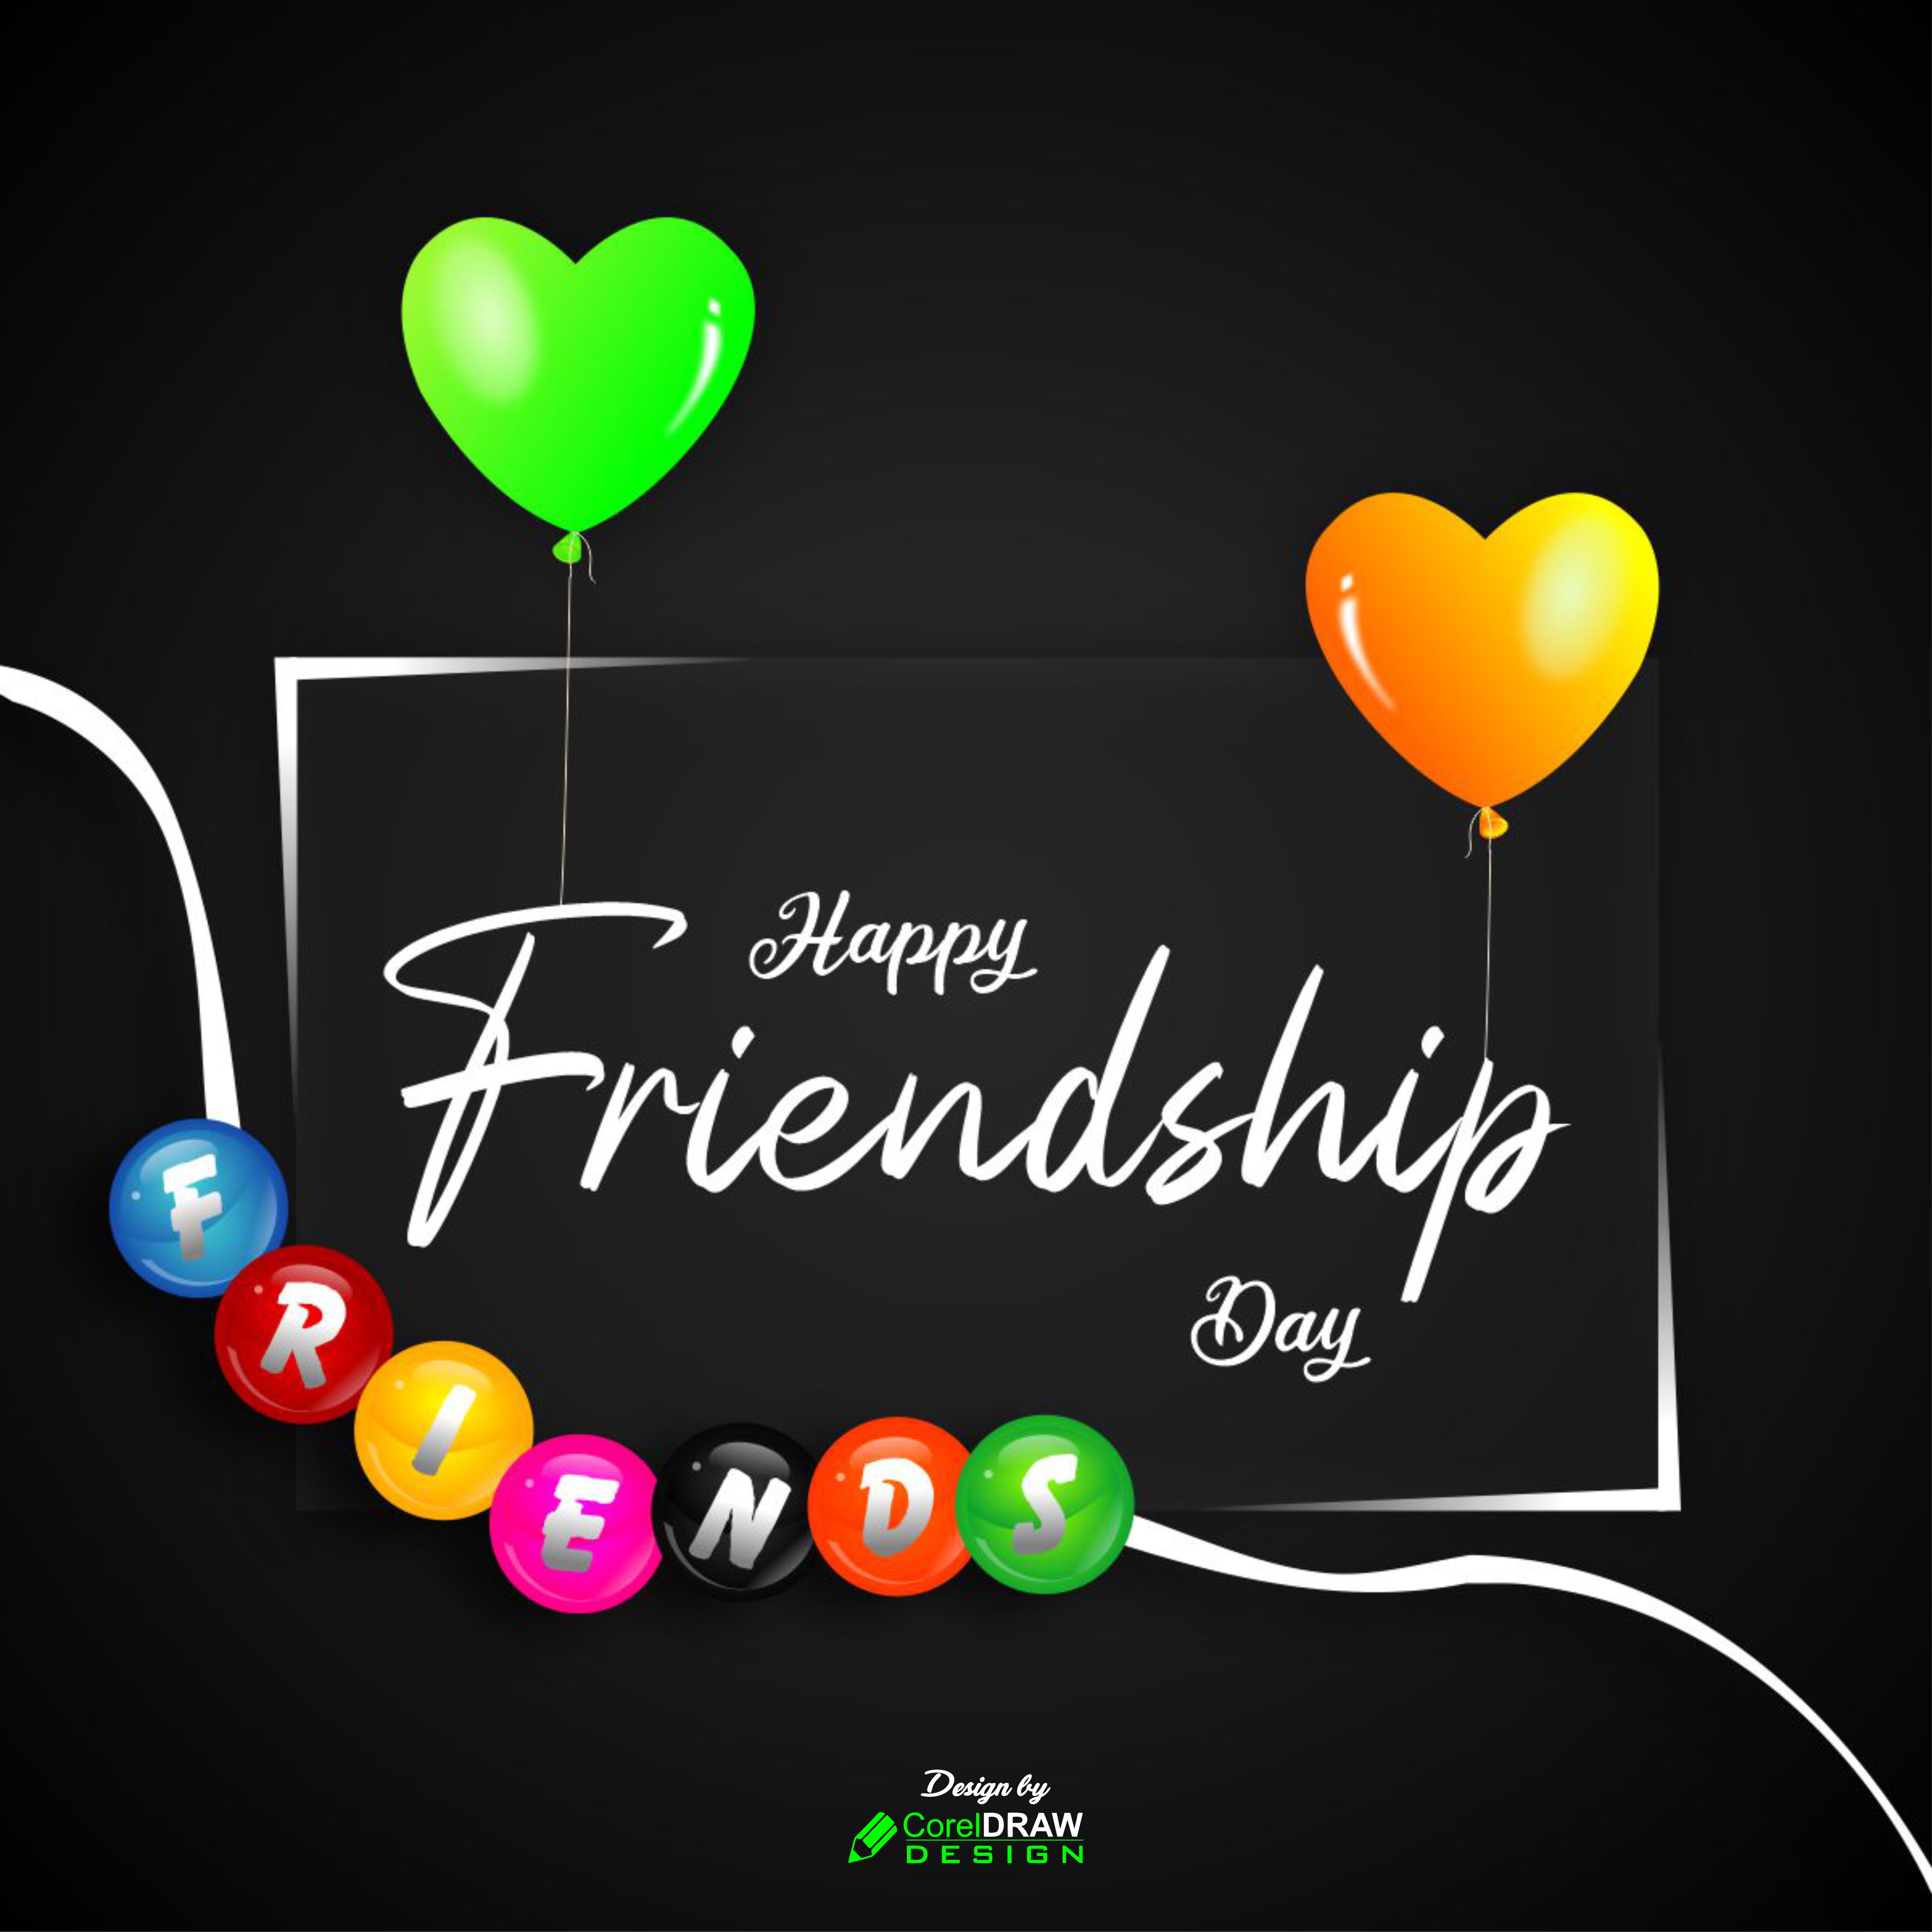 Download Friendship Day Background With Watercolor Balloon Free Vector |  CorelDraw Design (Download Free CDR, Vector, Stock Images, Tutorials, Tips  & Tricks)